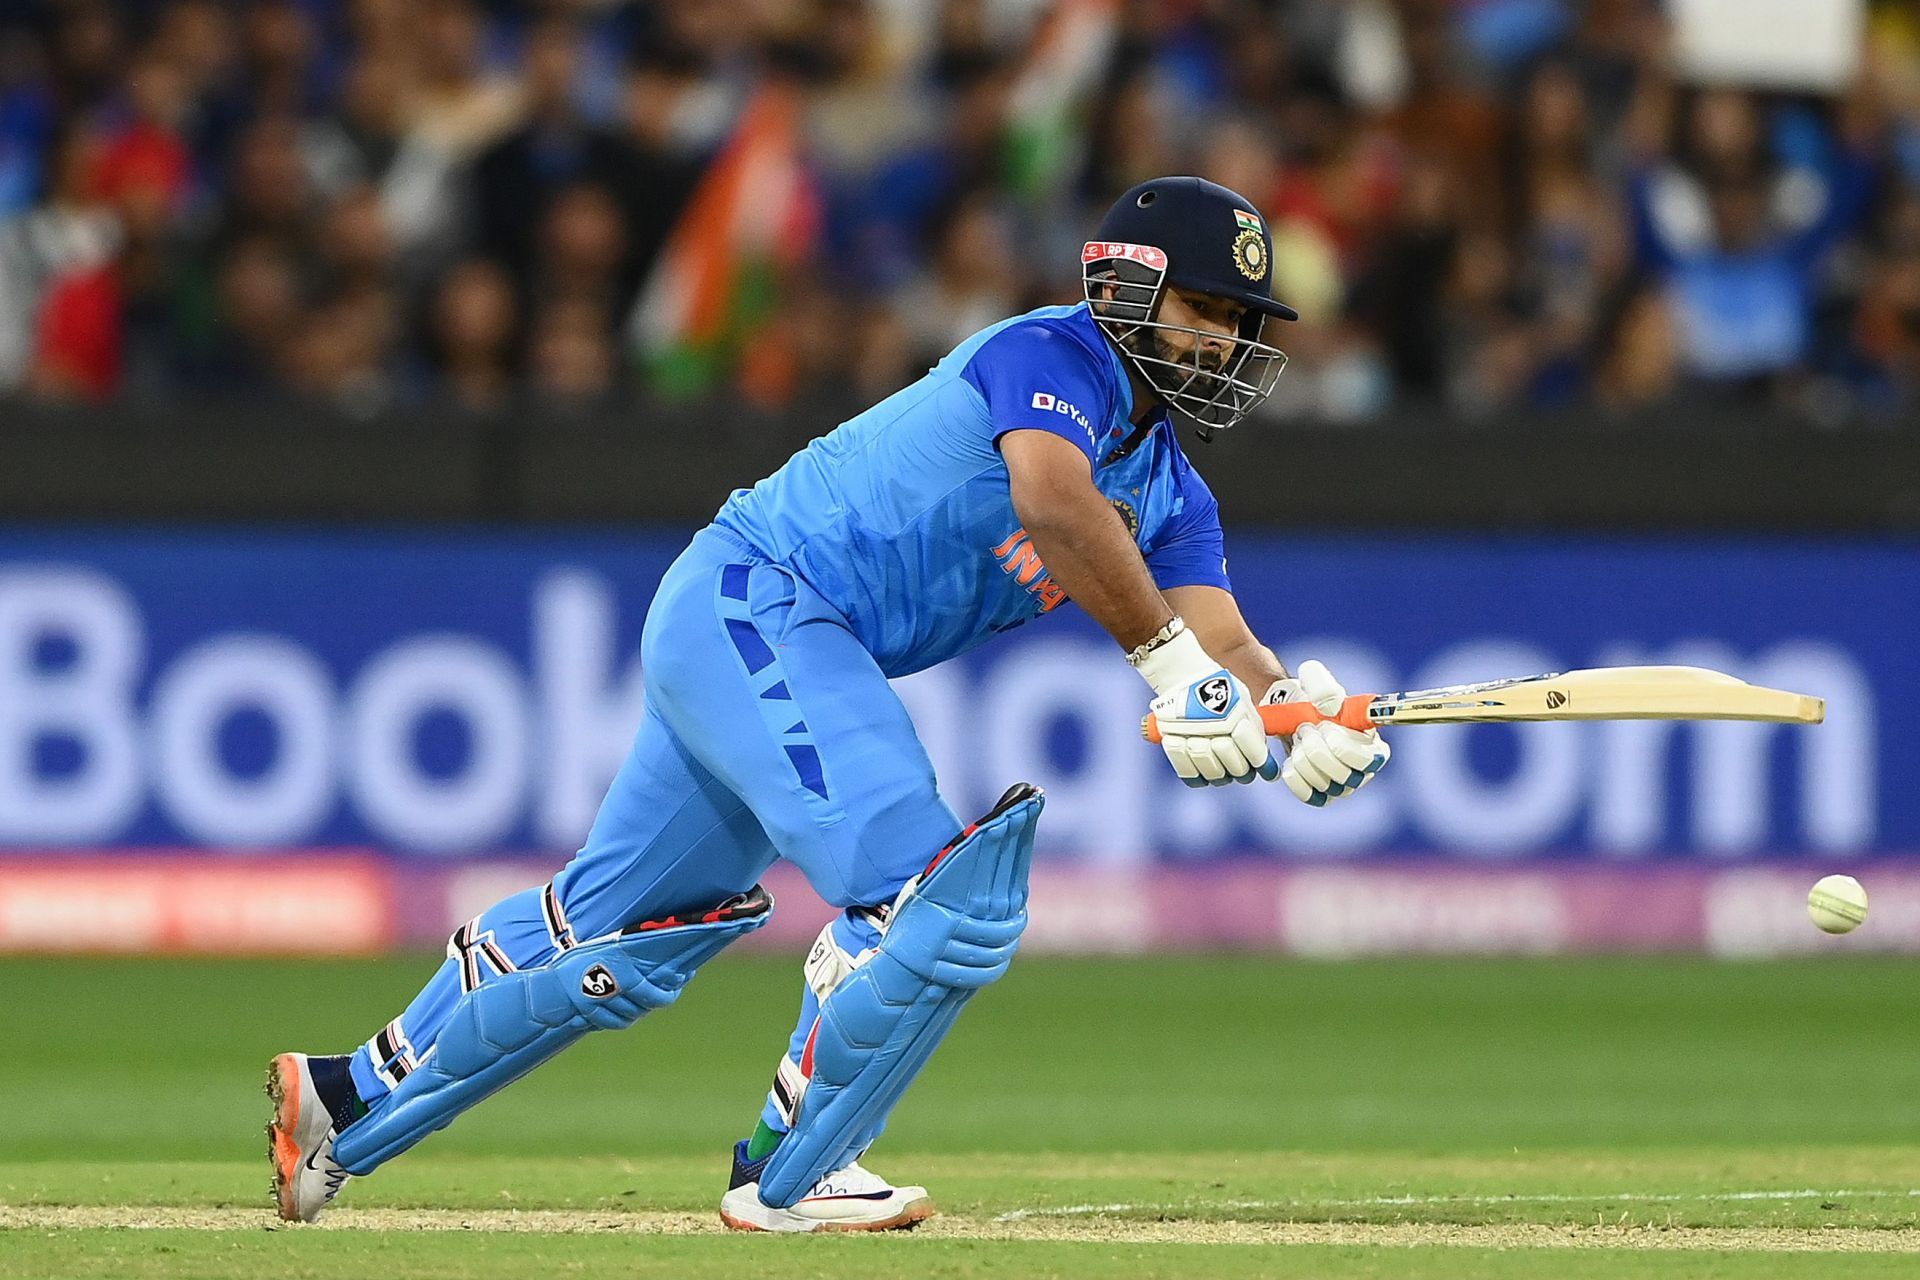 Rishabh Pant provides an enticing left-handed wicketkeeper-batter option in the middle order. [P/C: Getty]